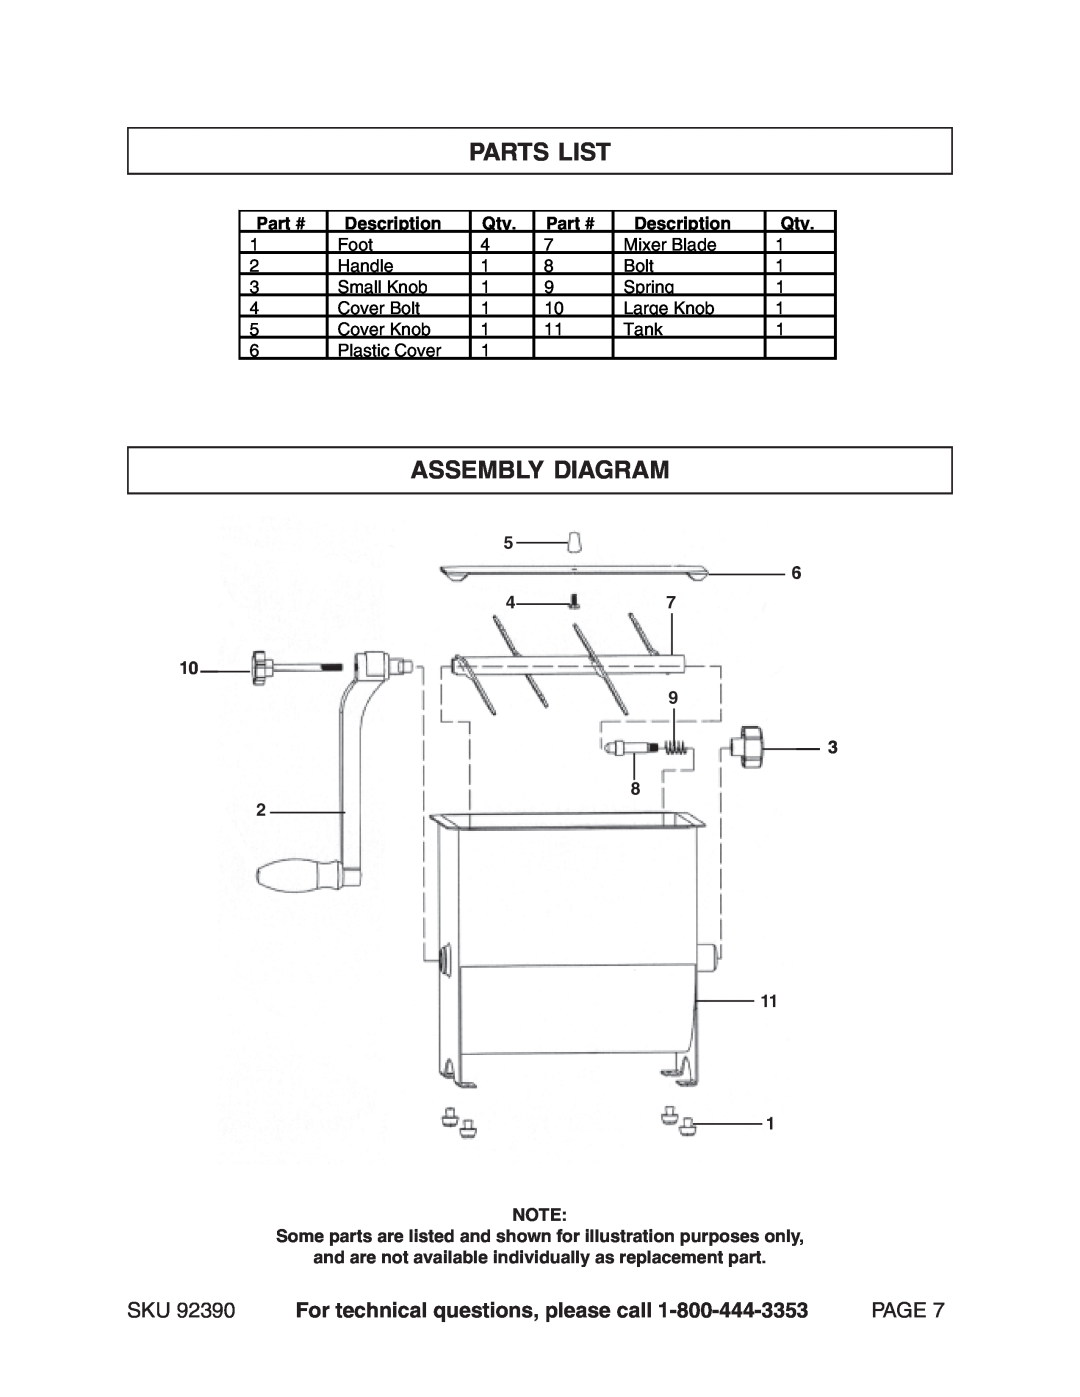 Harbor Freight Tools 92390 manual Parts List, Assembly Diagram, For technical questions, please call, Page, Description 